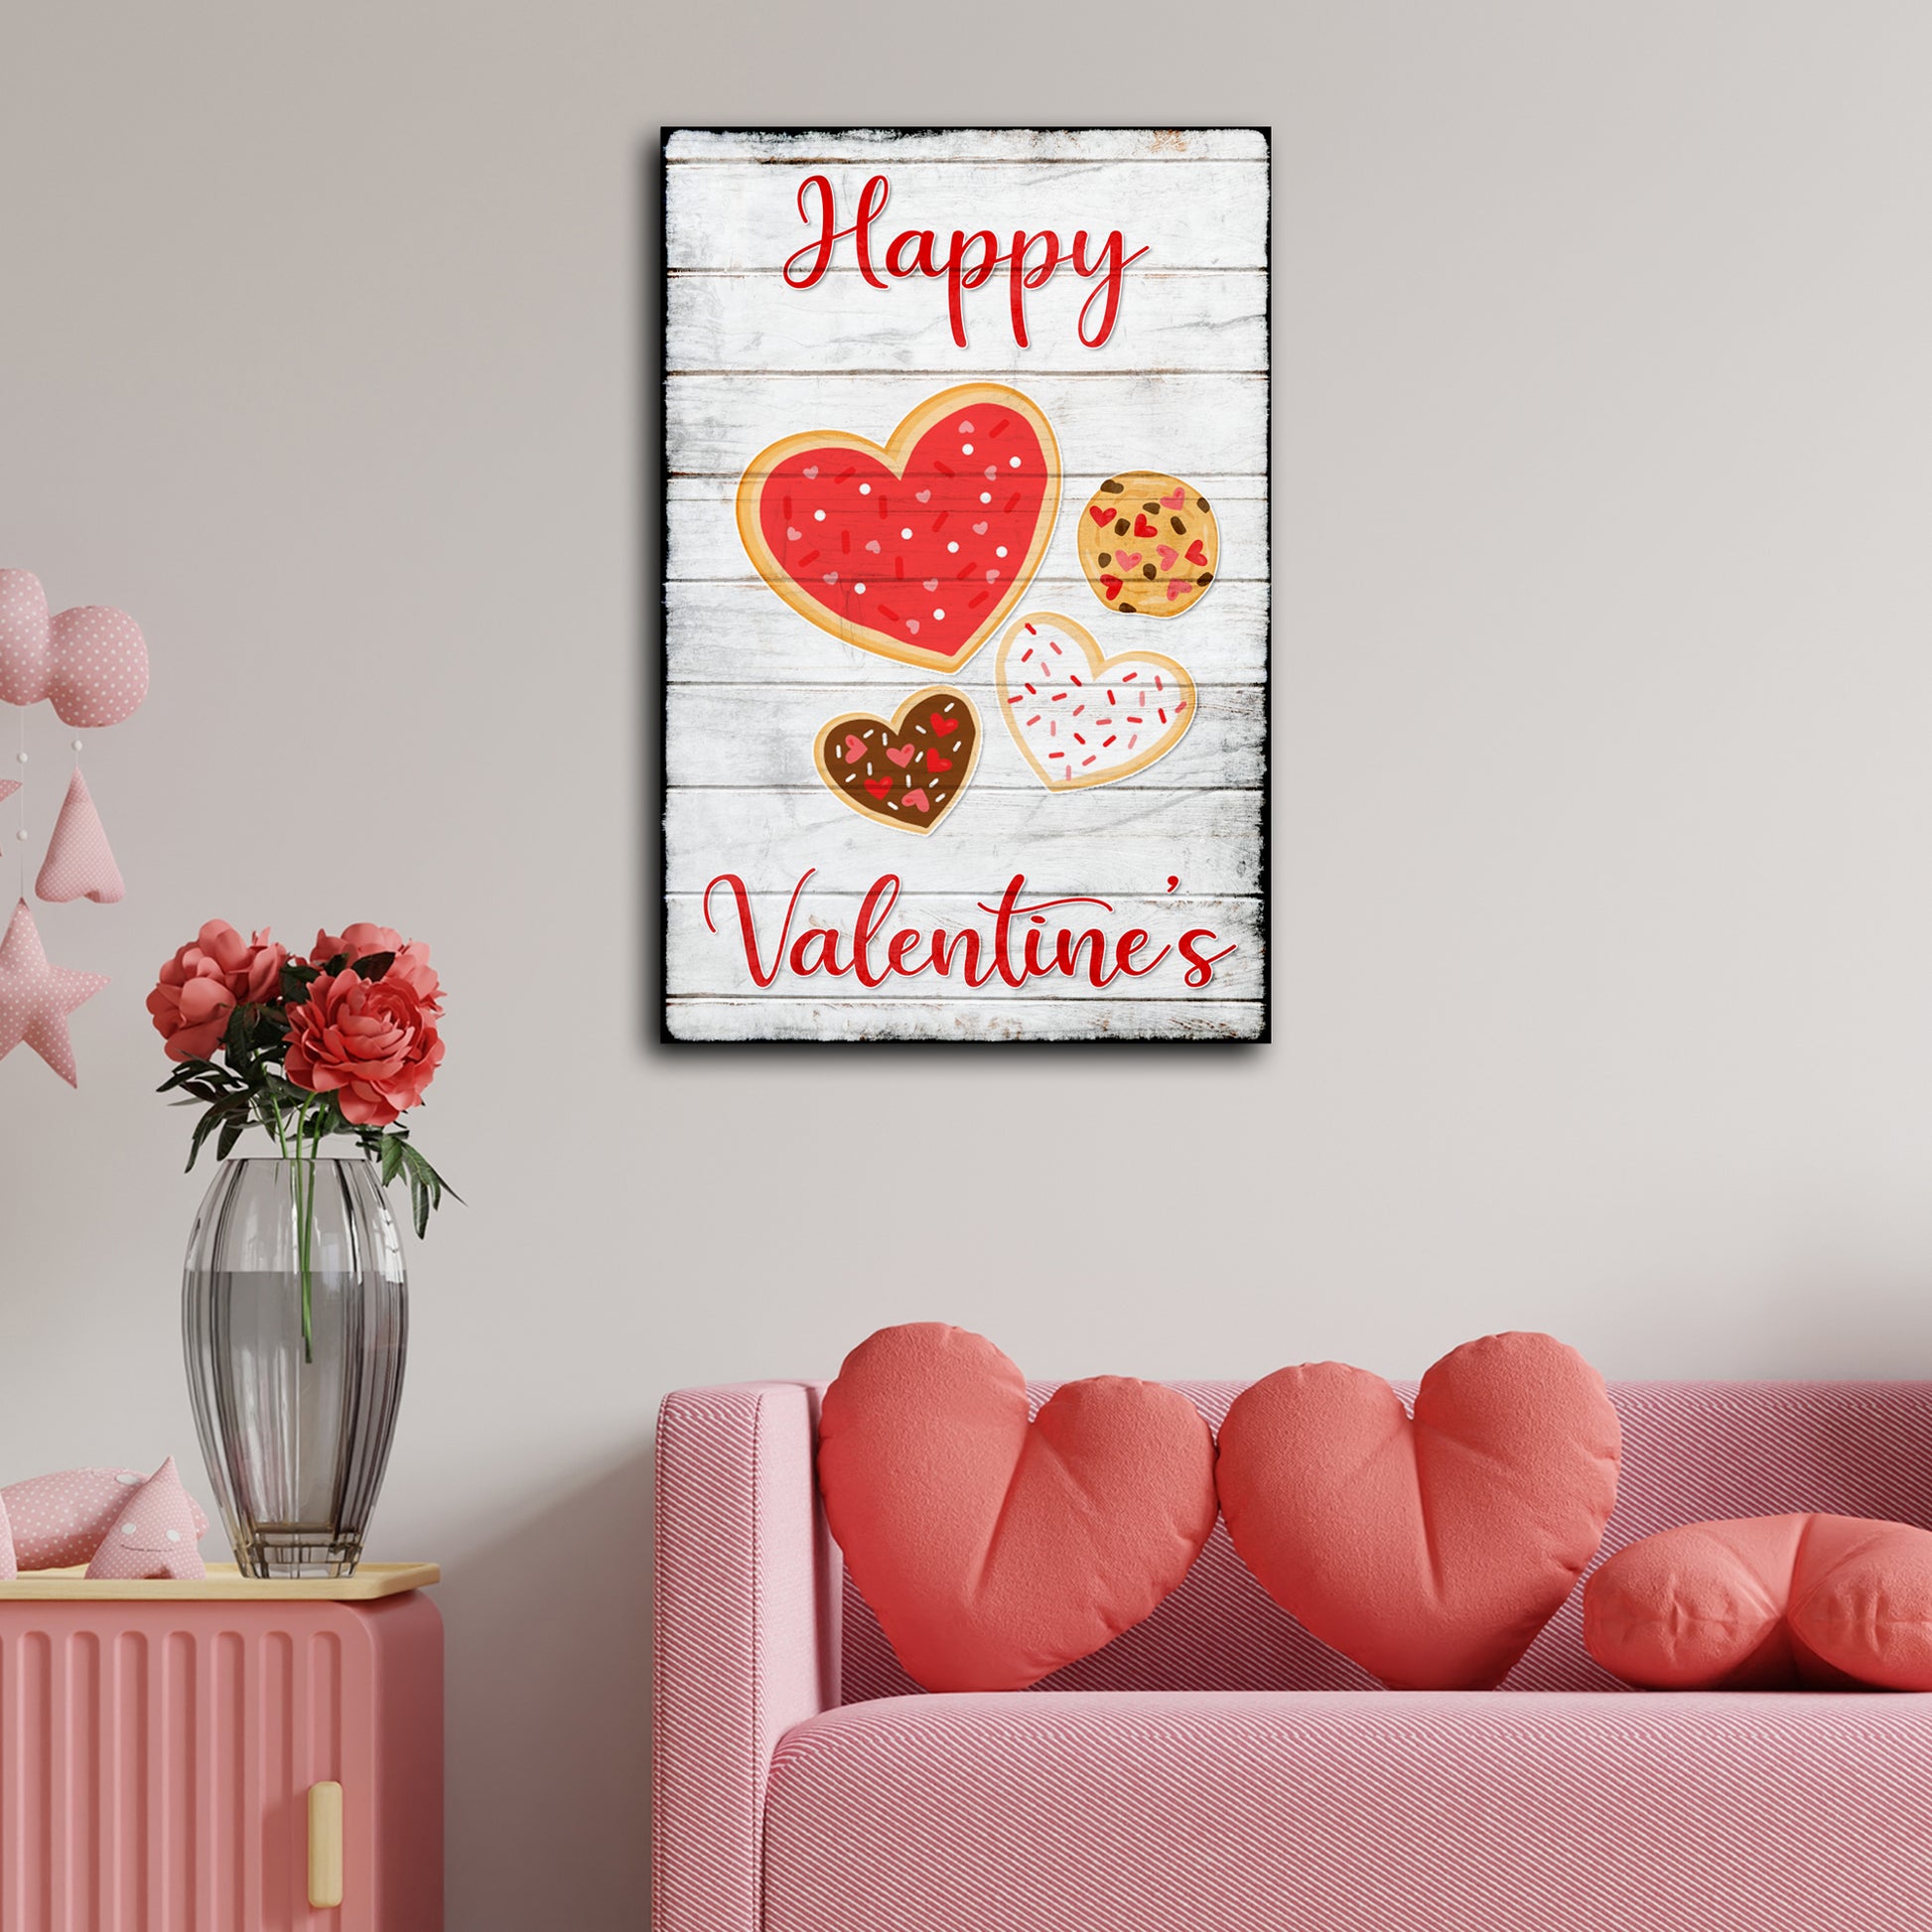 Valentine Heart Cookies Sign - Image by Tailored Canvases